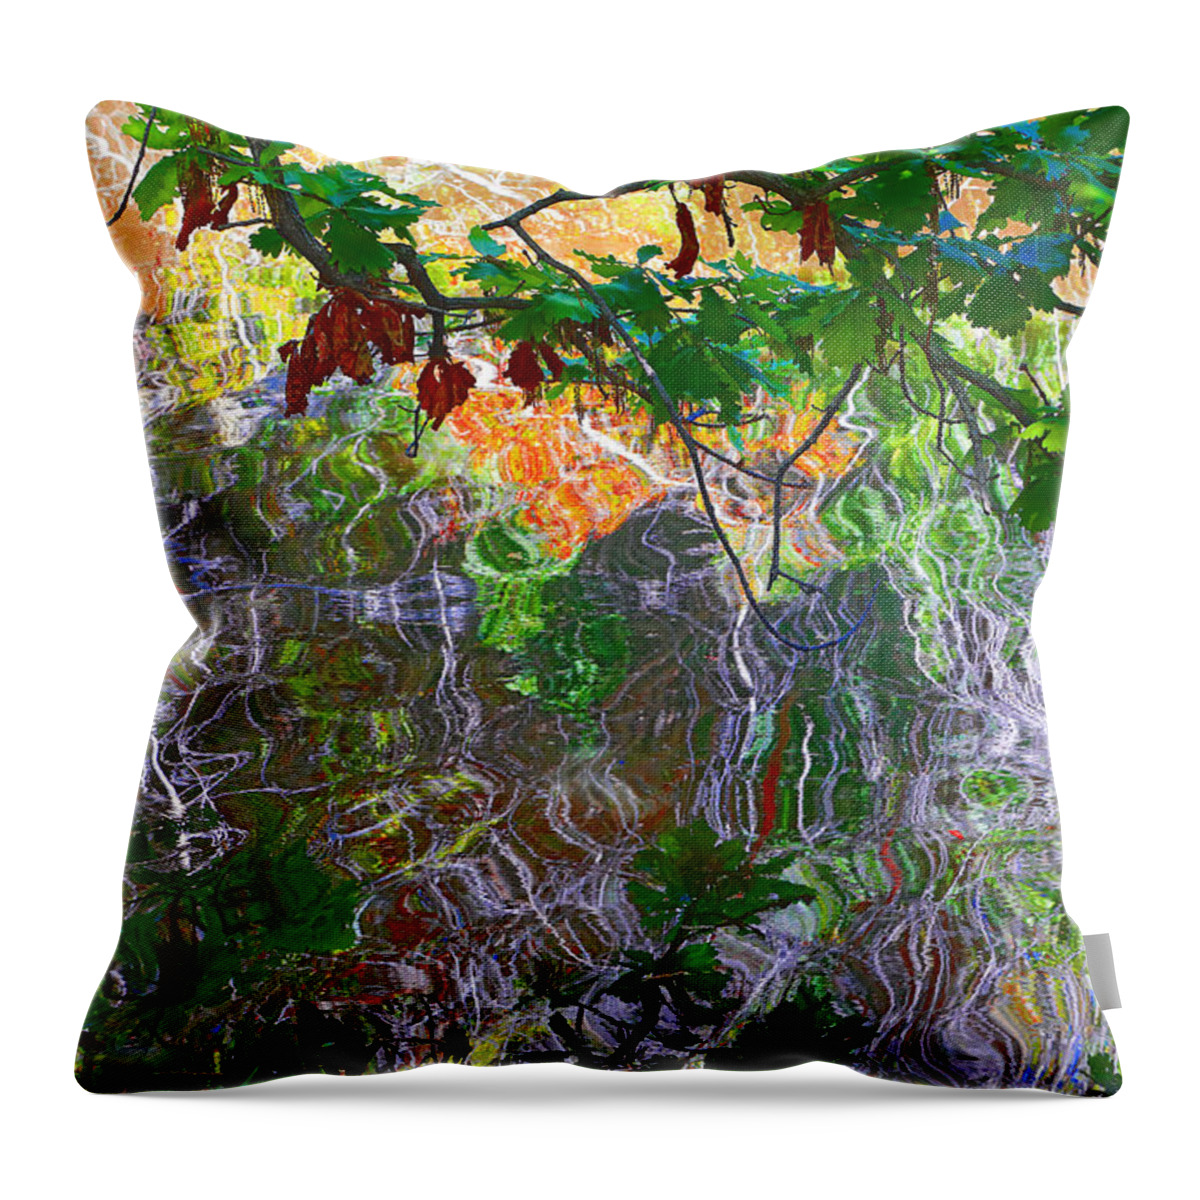 Green Leaves Over Water Throw Pillow featuring the photograph Green Leaves Over Water by Viktor Savchenko